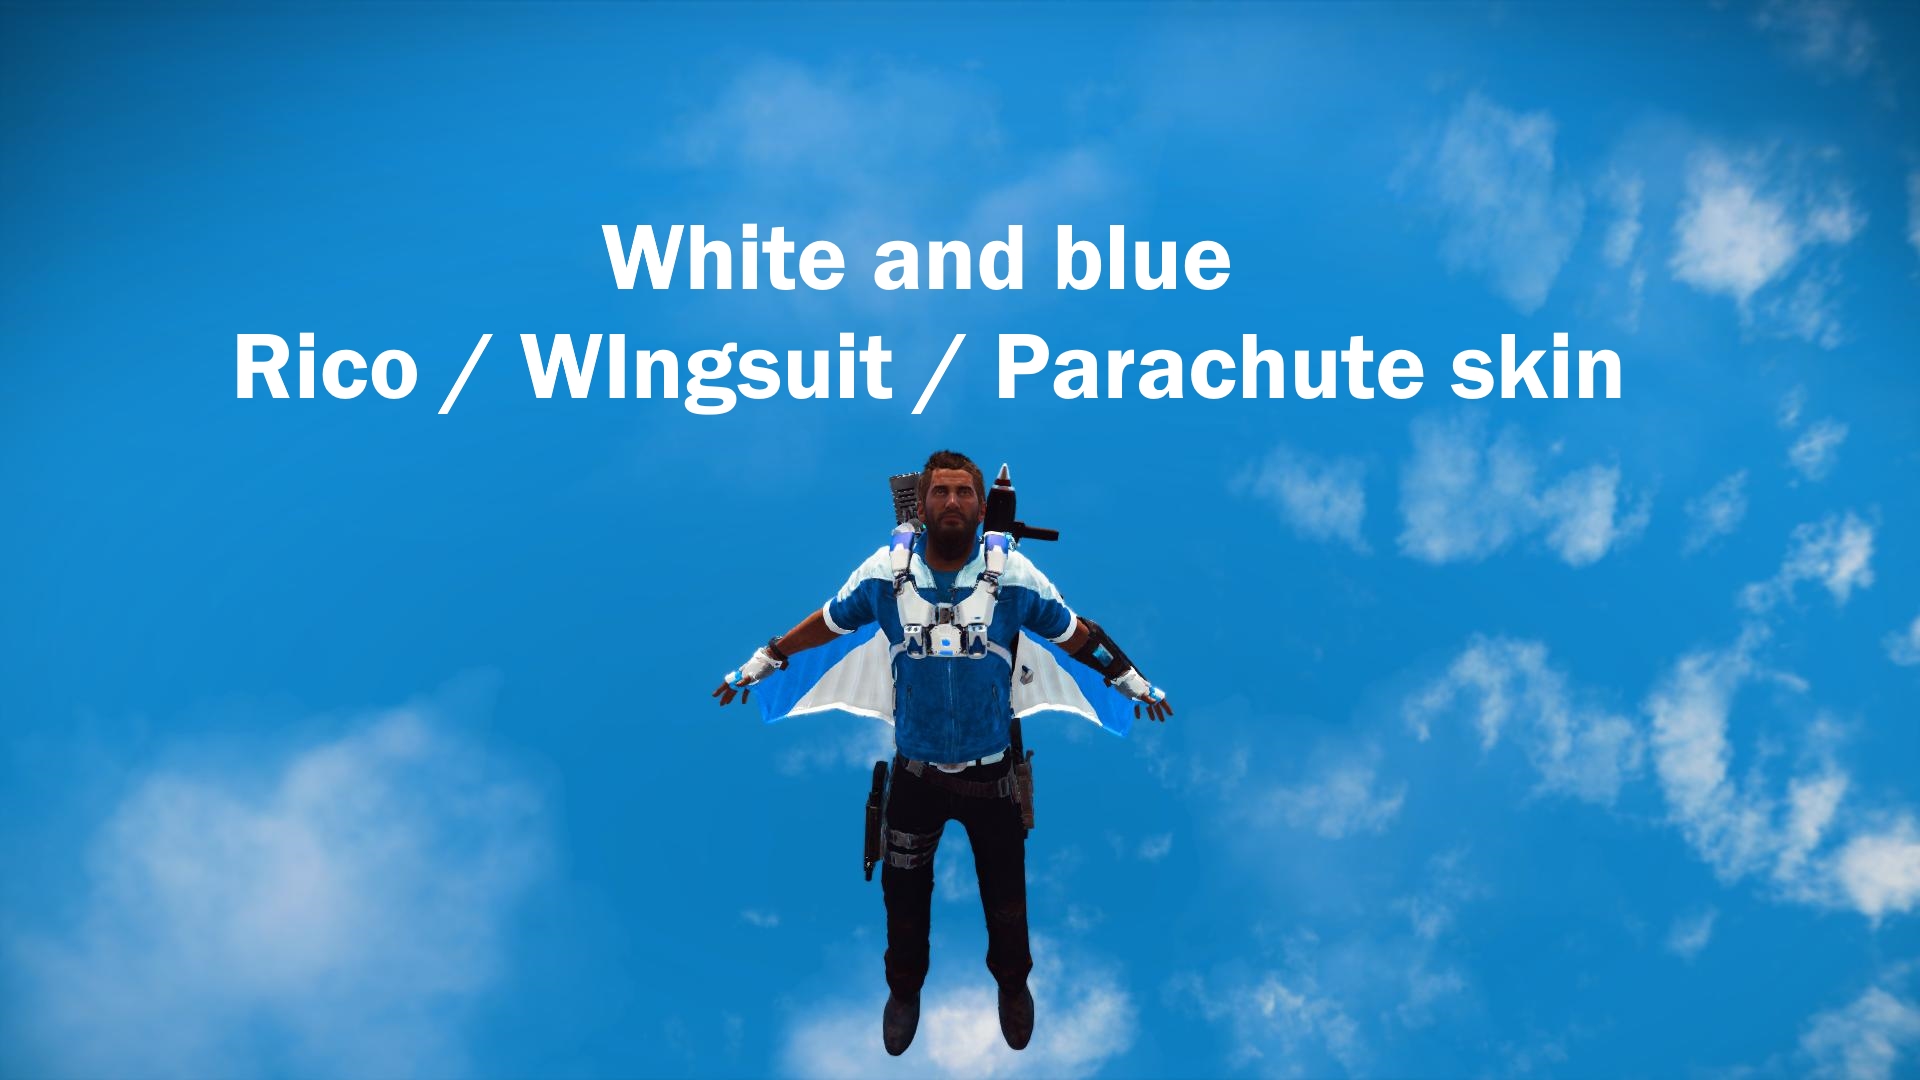 White and blue Rico / Wingsuit / Parachute skin